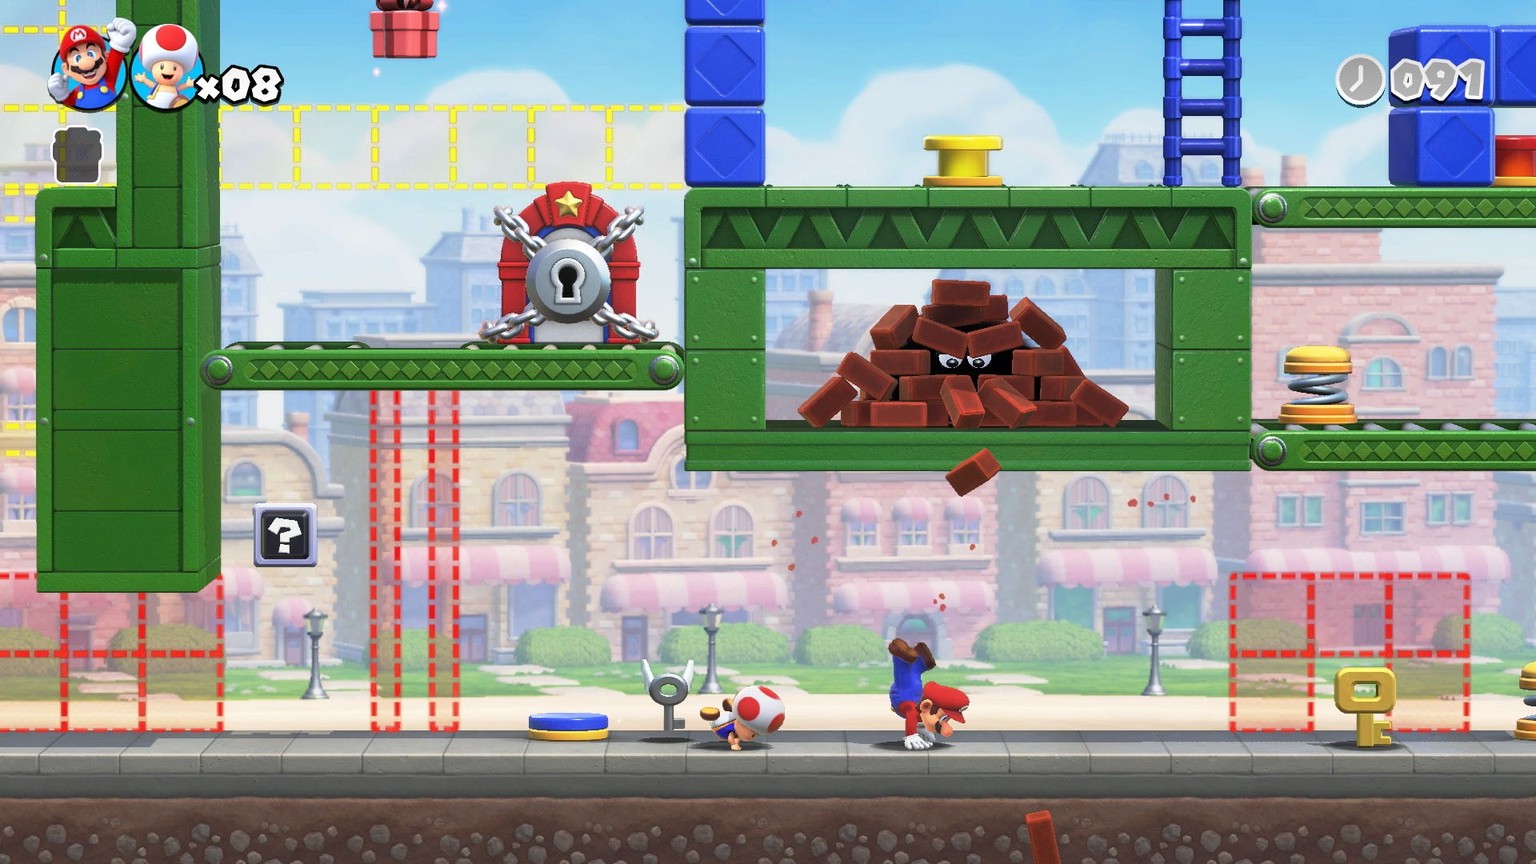 Super Mario is protected from falling objects by doing a handstand.